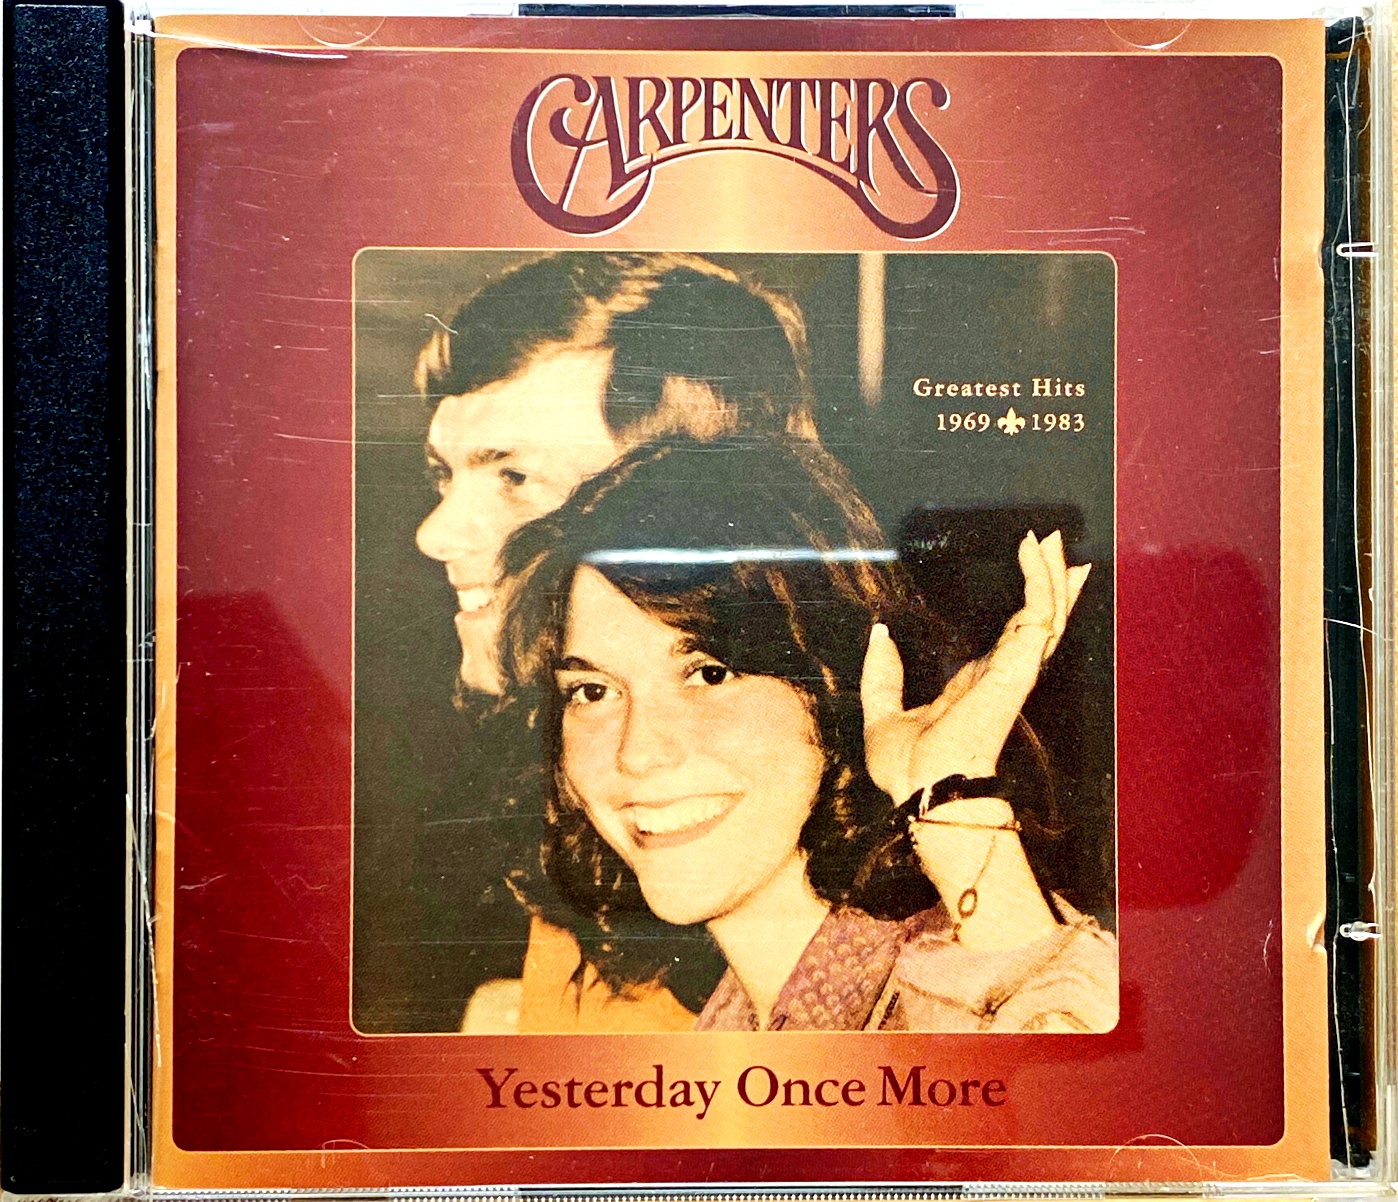 2xCD Carpenters – Yesterday Once More (Greatest Hits 1969 - 1983)